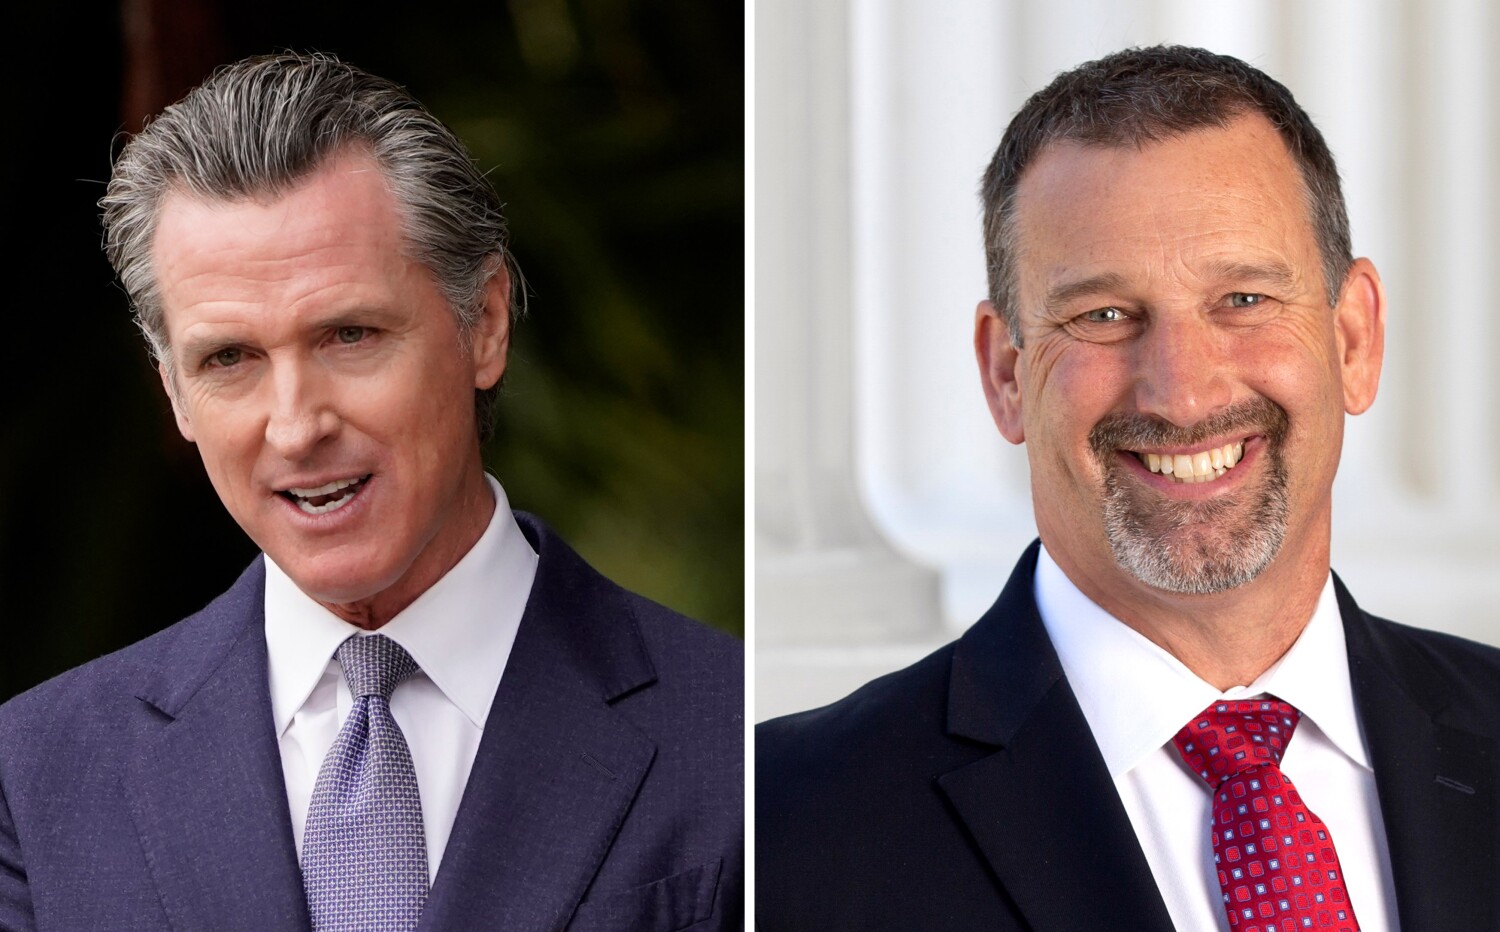 Voters dissatisfied about direction of California but still back Newsom, poll shows 